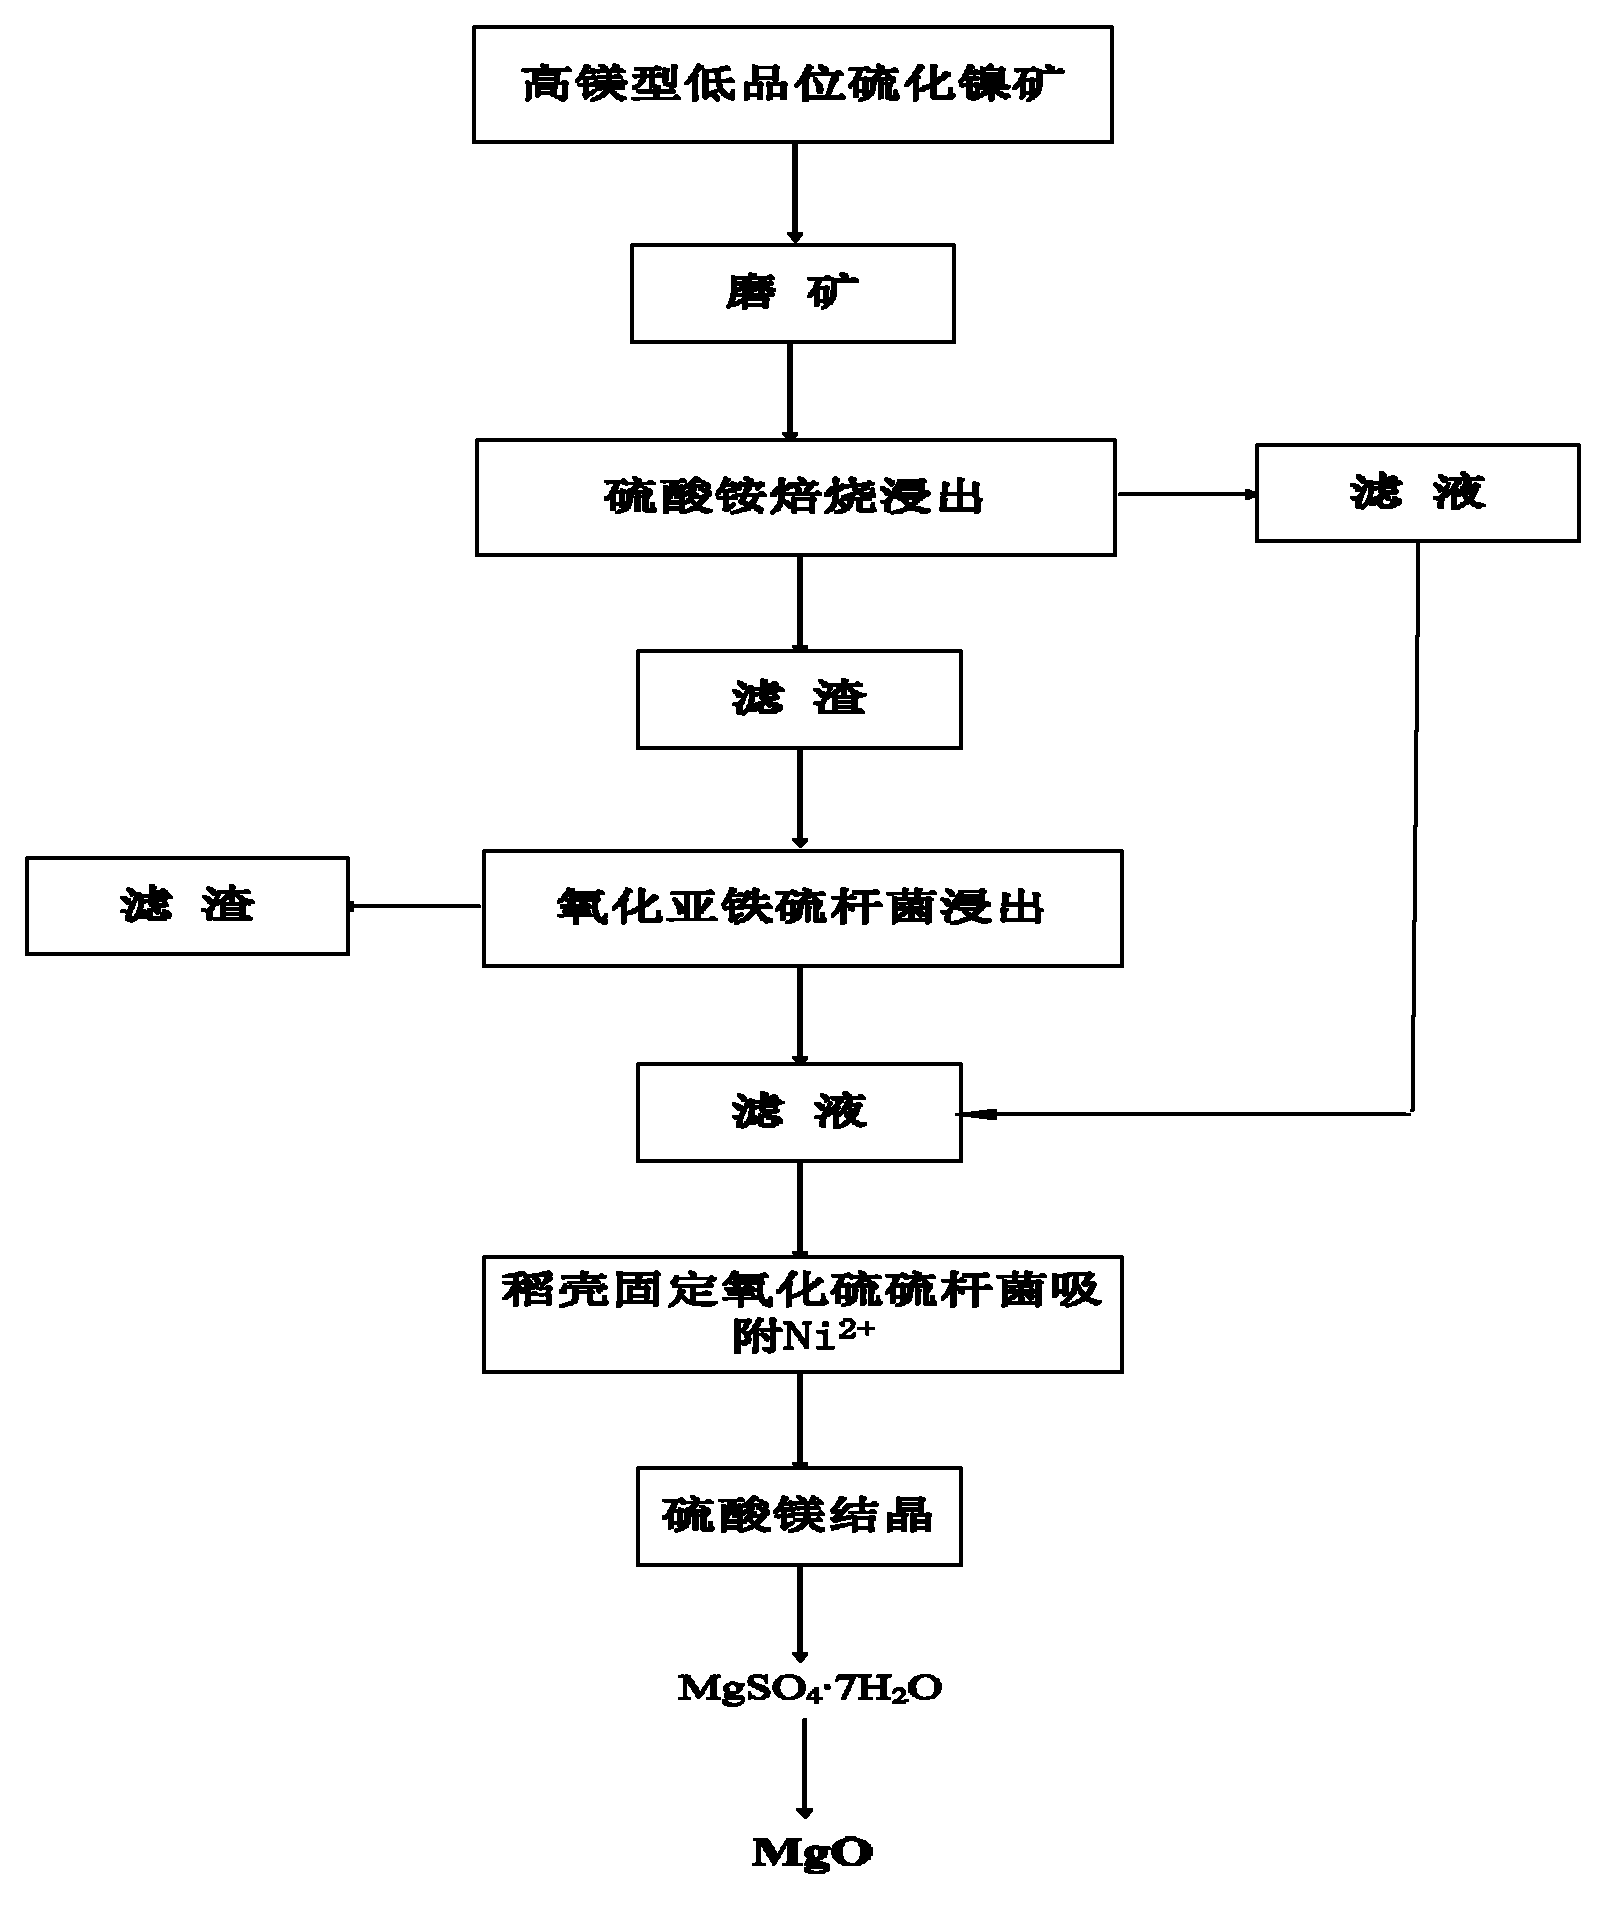 Method for recovering nickel and magnesium elements from high-magnesium low-grade nickel sulfide ore